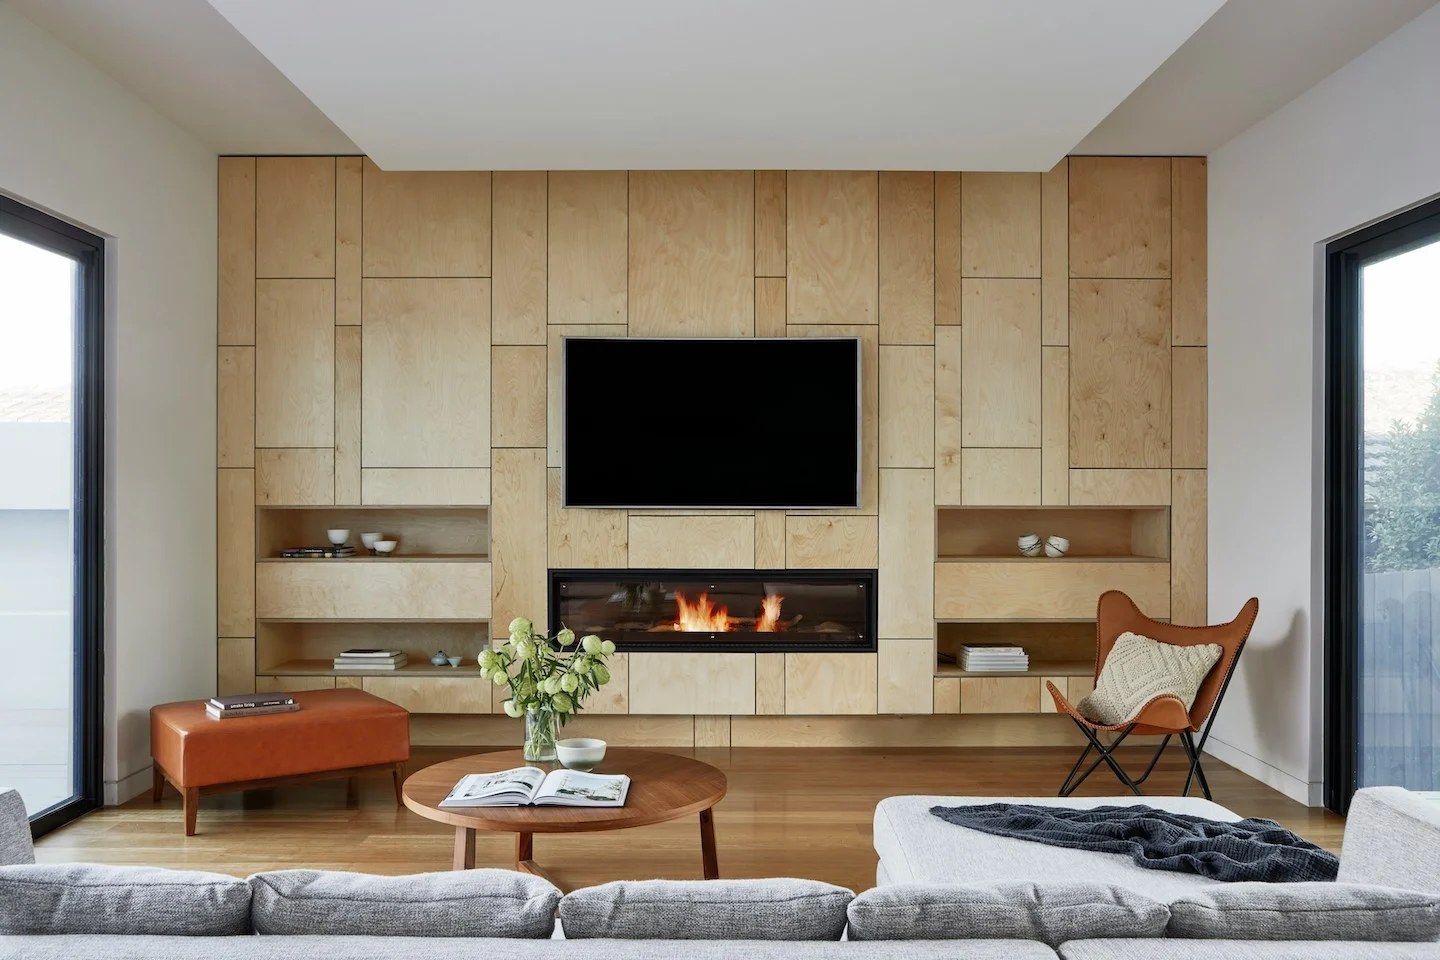 Living room with wooden panel accent wall and electric fireplace.